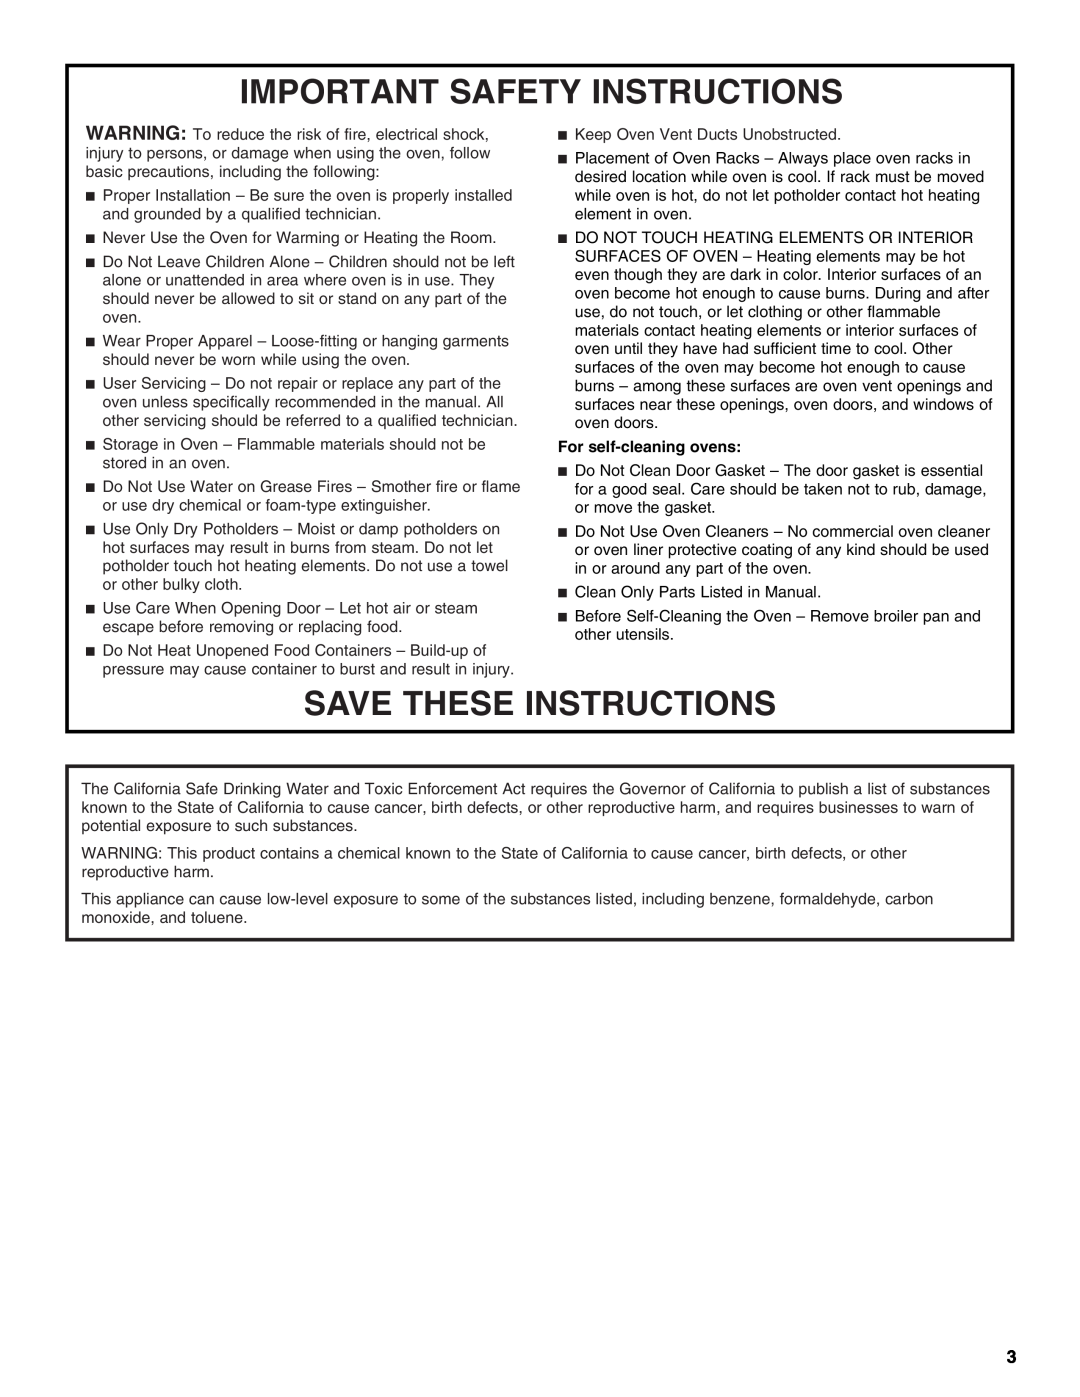 Whirlpool GBS279PVB, GBS309, GBD309 manual Important Safety Instructions, Save These Instructions, For self-cleaning ovens 